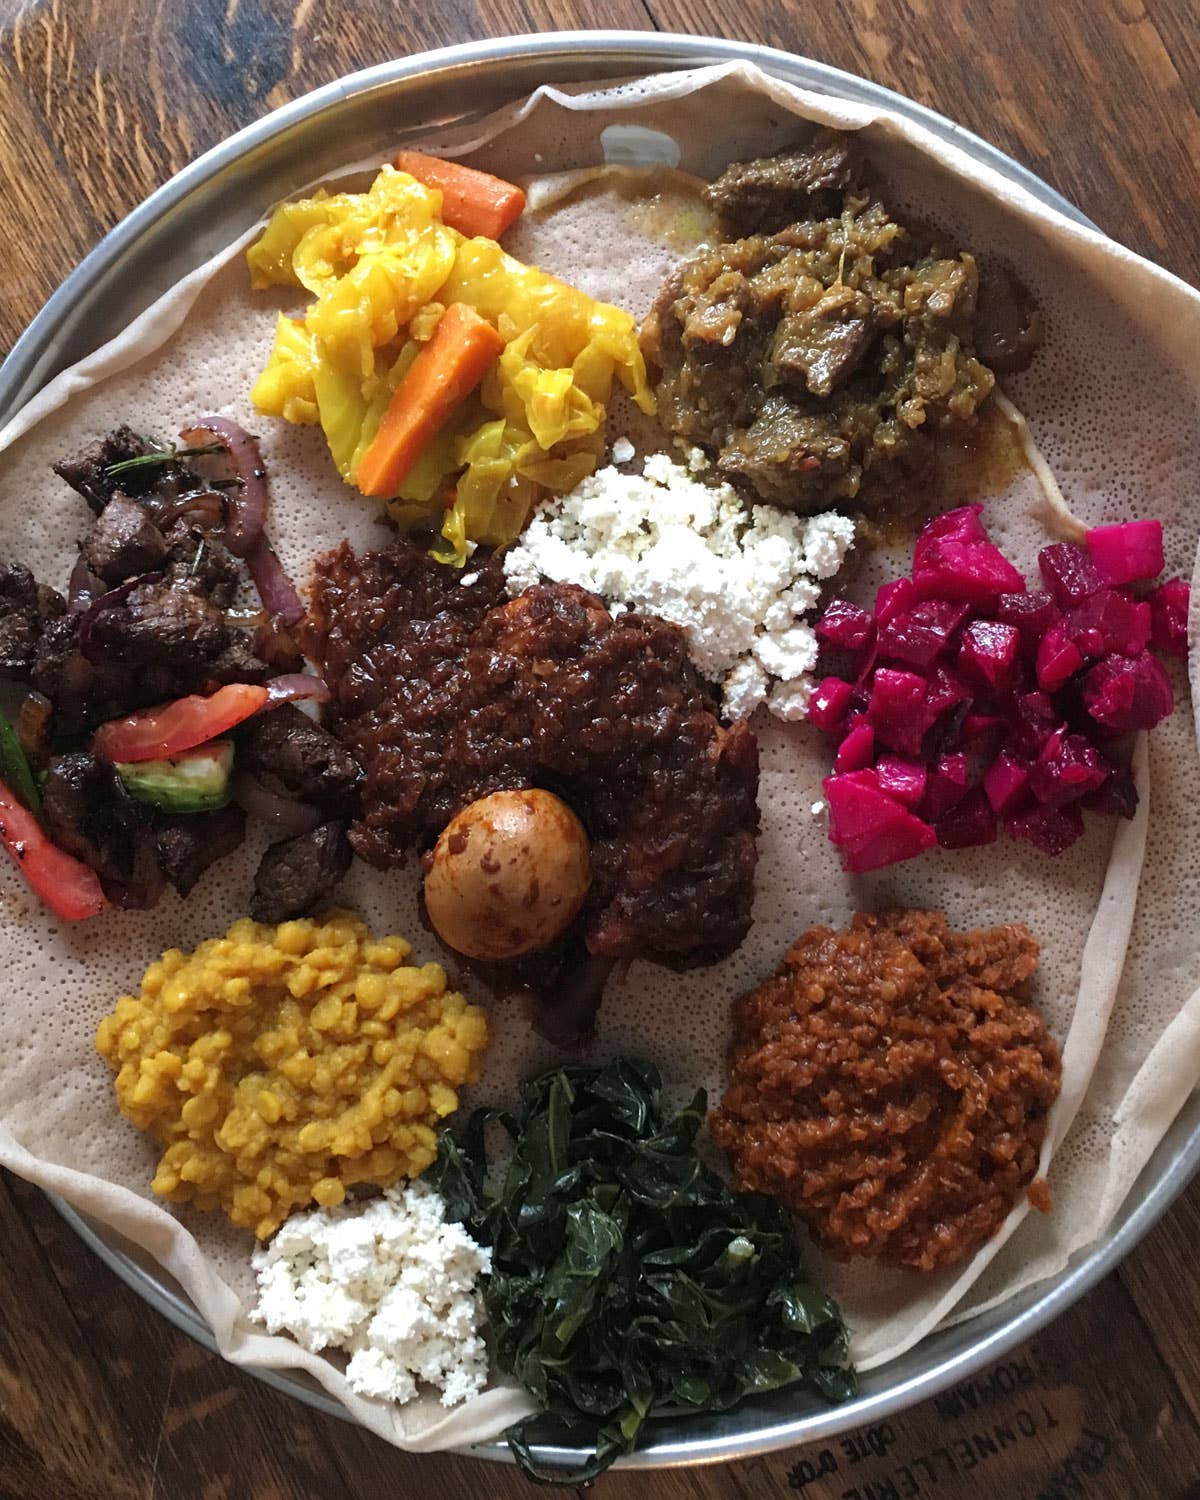 This Ethiopian Meal is a Beautiful Mosaic Meant to be Shared